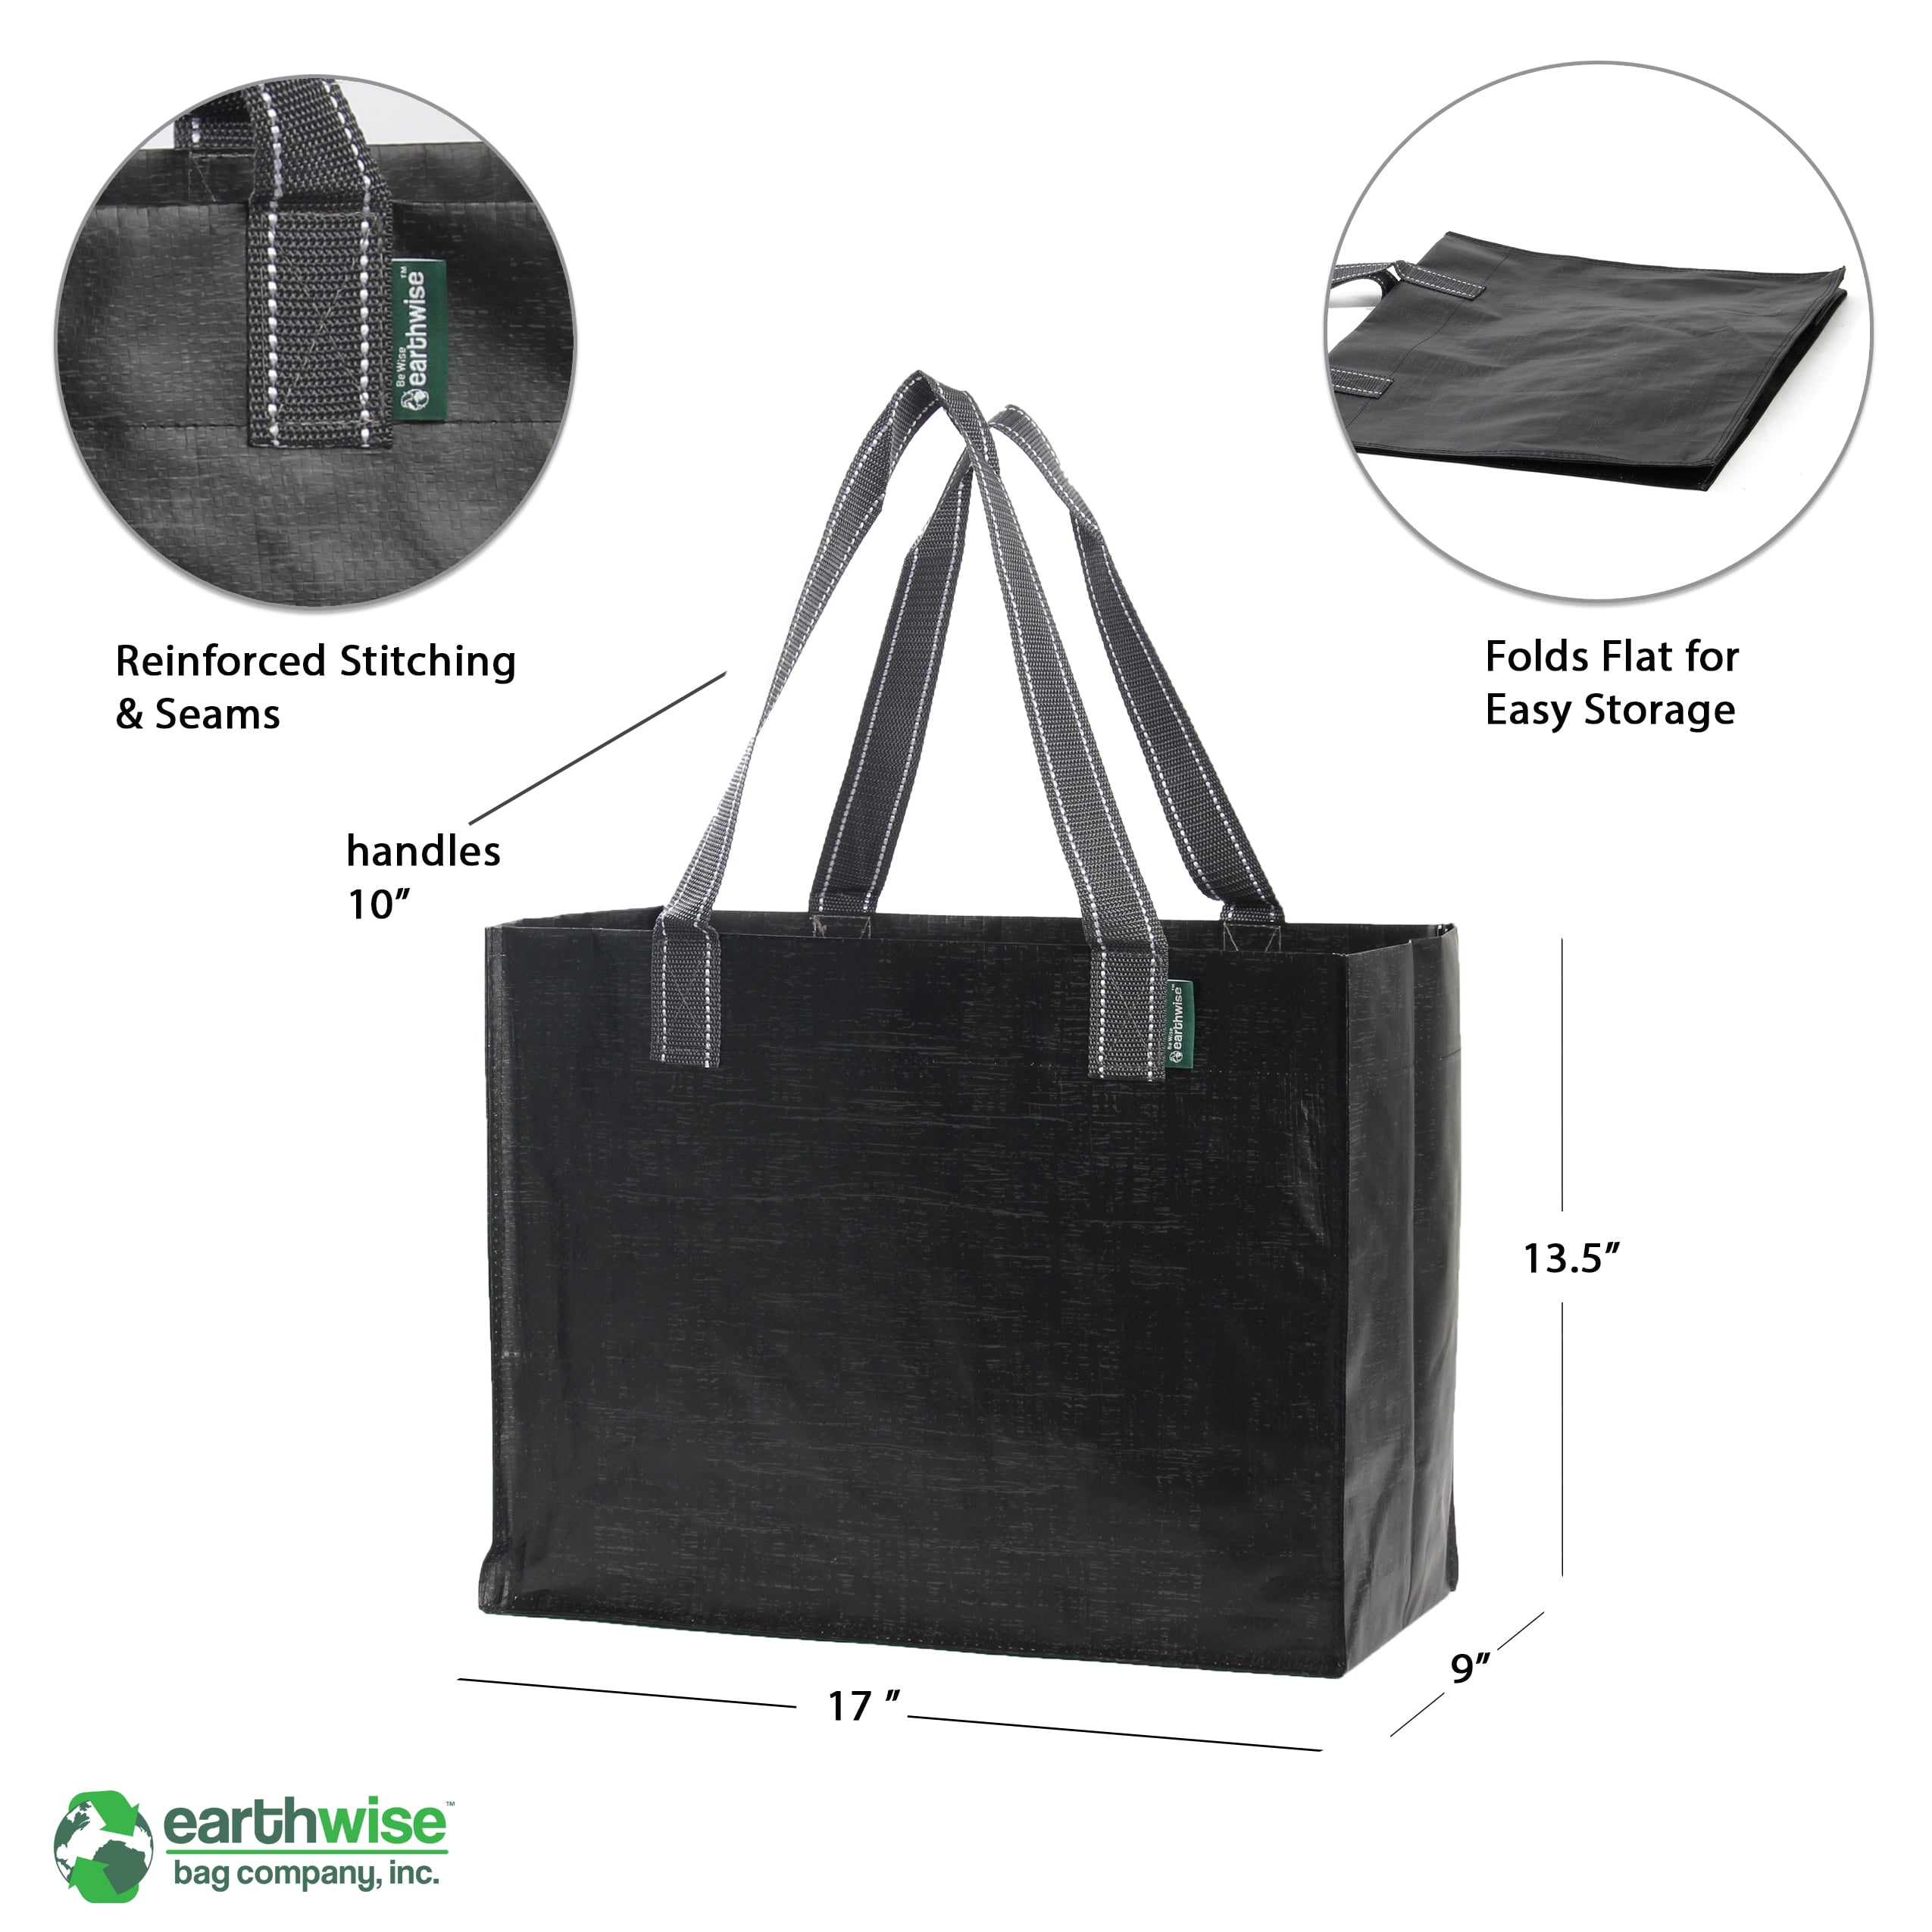 Details about   Earthwise Reusable Grocery Bags Heavy Duty Multi Purpose Utility Tote 2 Pack 